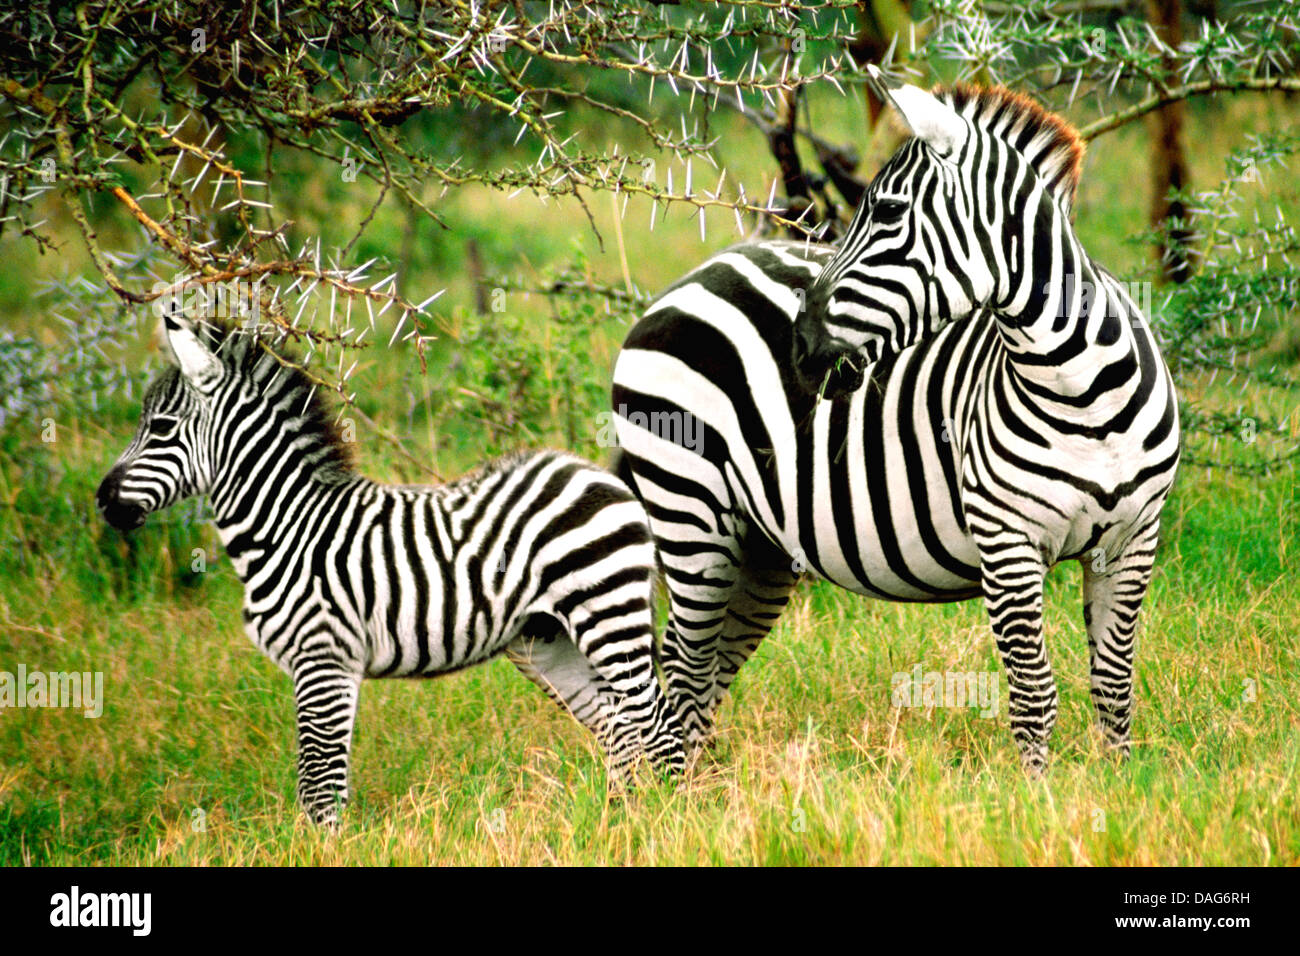 ZEBRAS MOTHER AND BABY Stock Photo